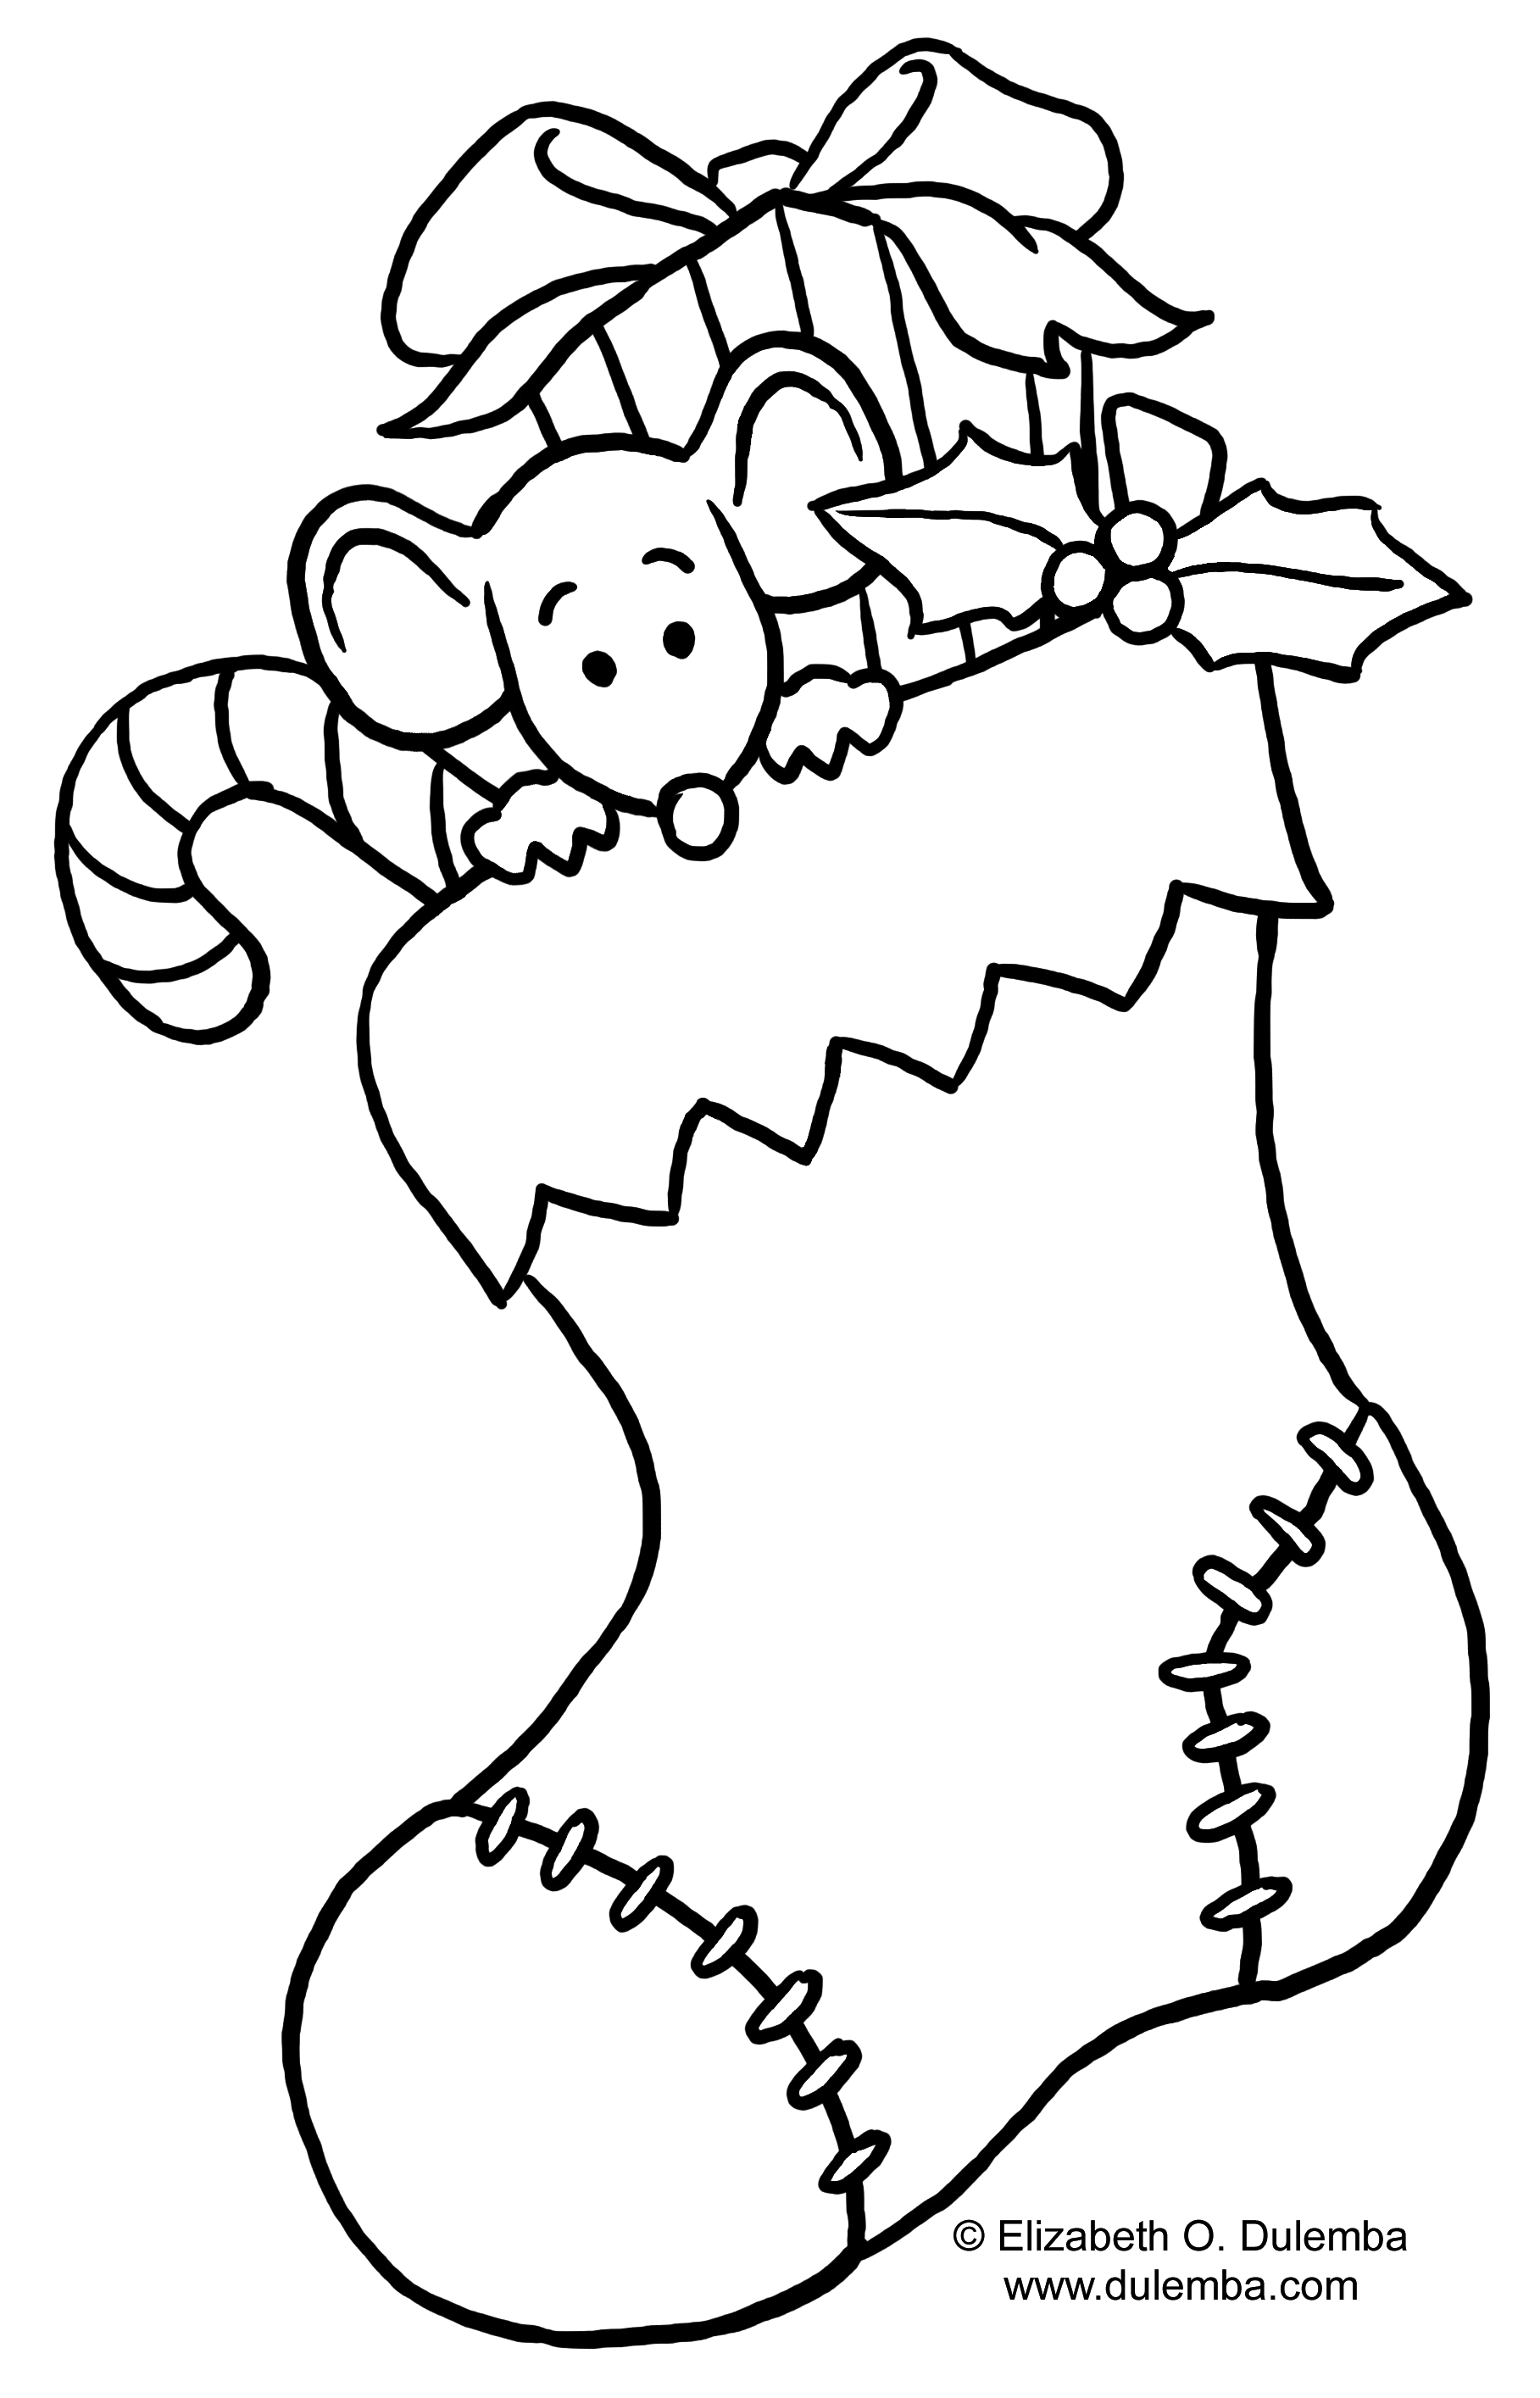 Free Holiday Printable Coloring Pages | Free Coloring Pages